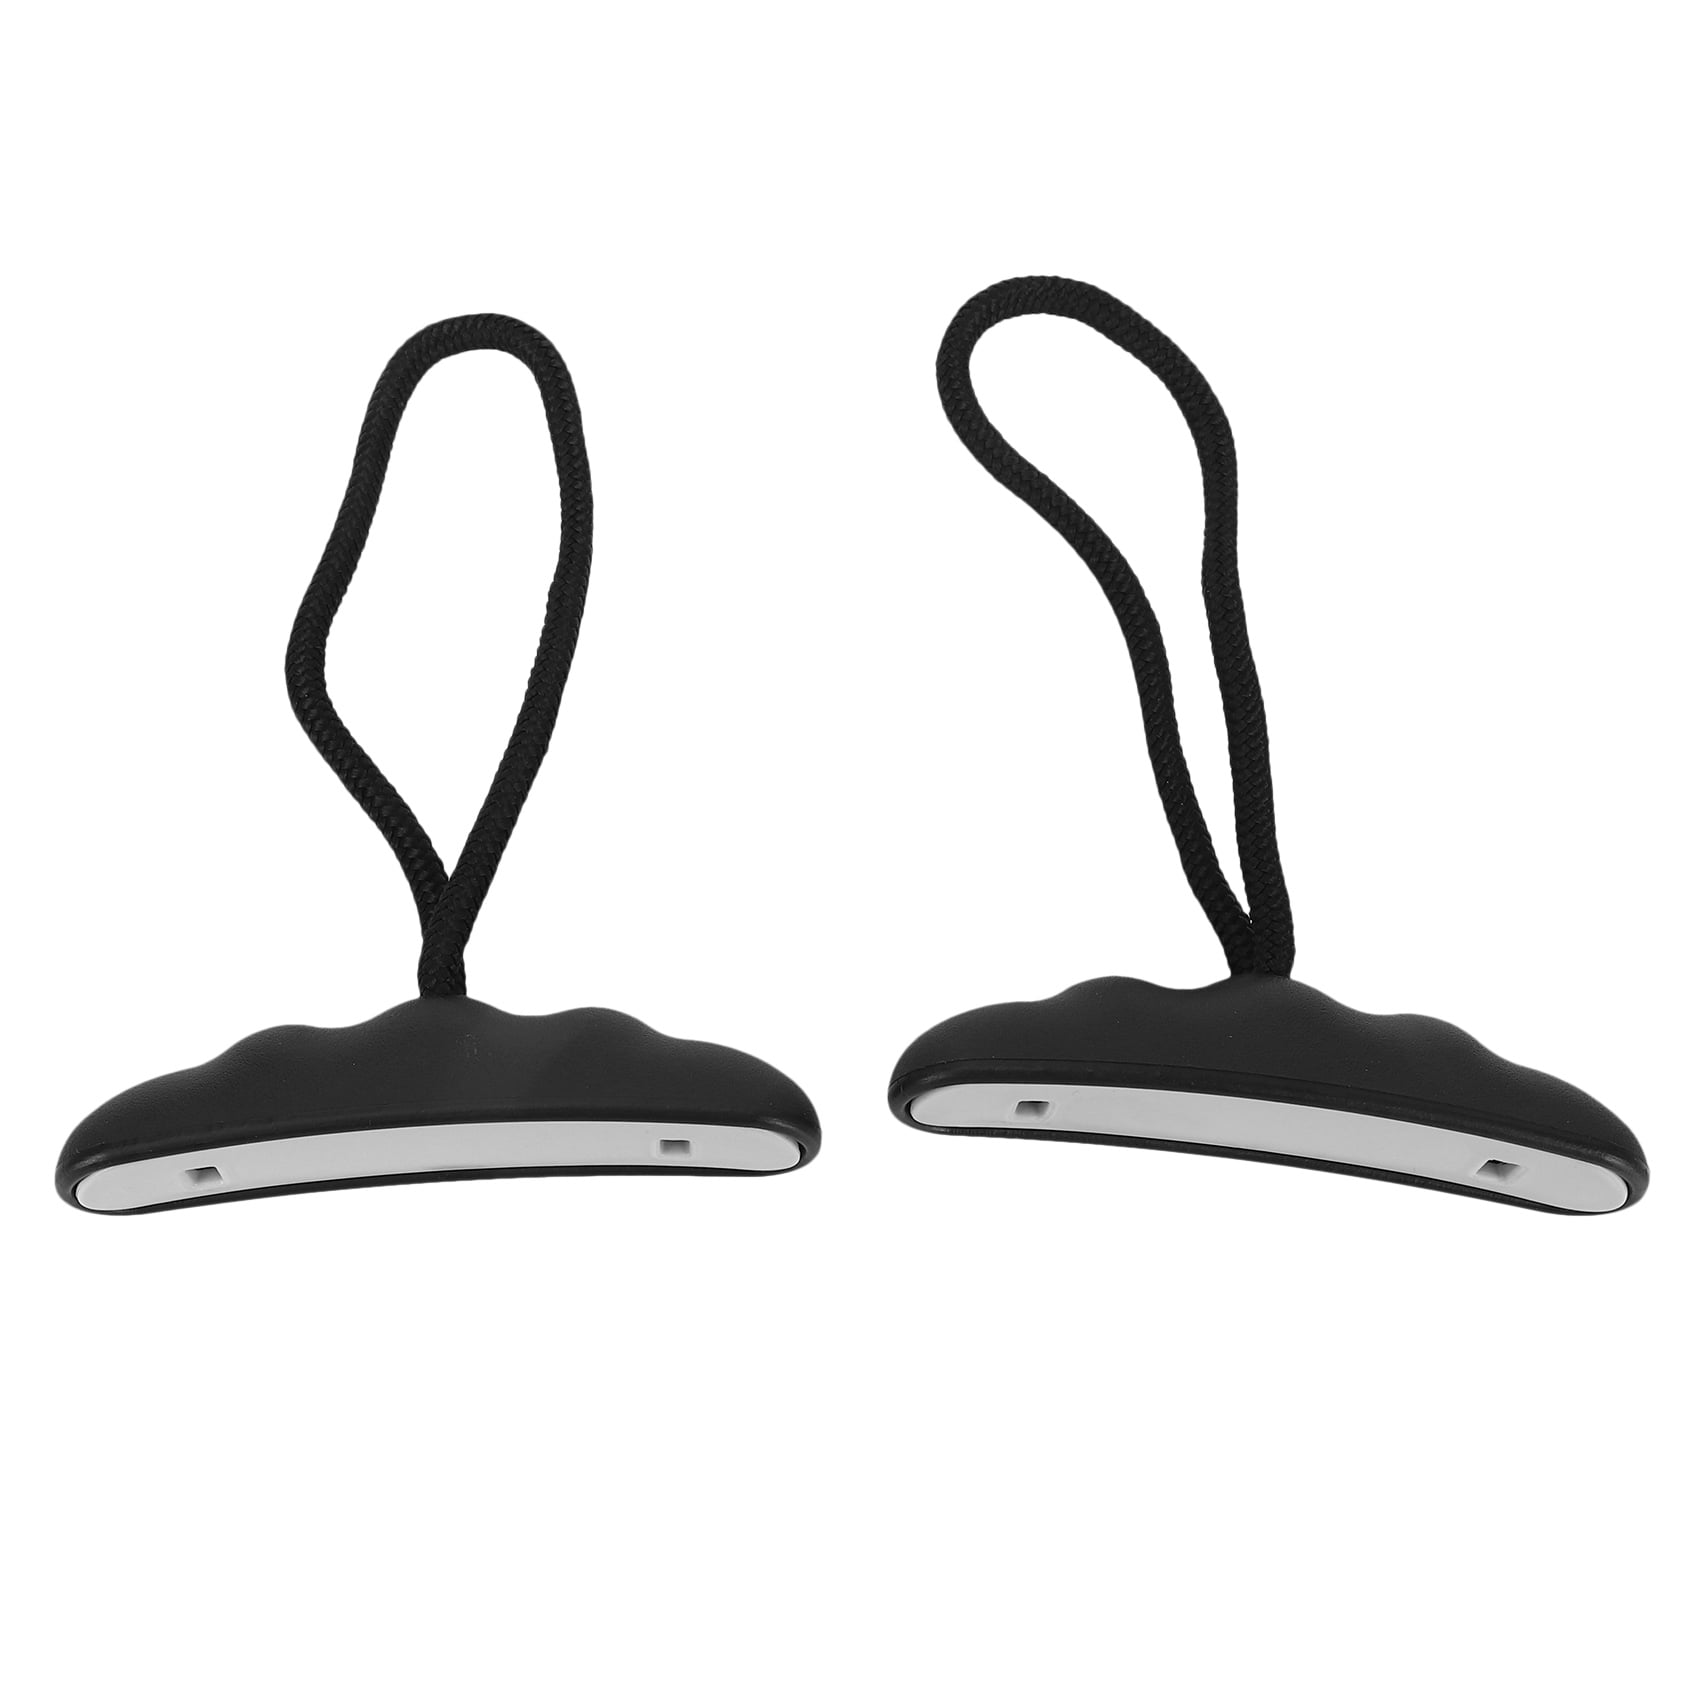 Replacement Installation Kit,Kayak Carry Handle Pull Handle with Cord & Pad Eyes for lifting heavy kayaks giving a good grip - Strong T-Handle Design Ultra Heavy Duty Bungee 2 Pack Kayak Handles